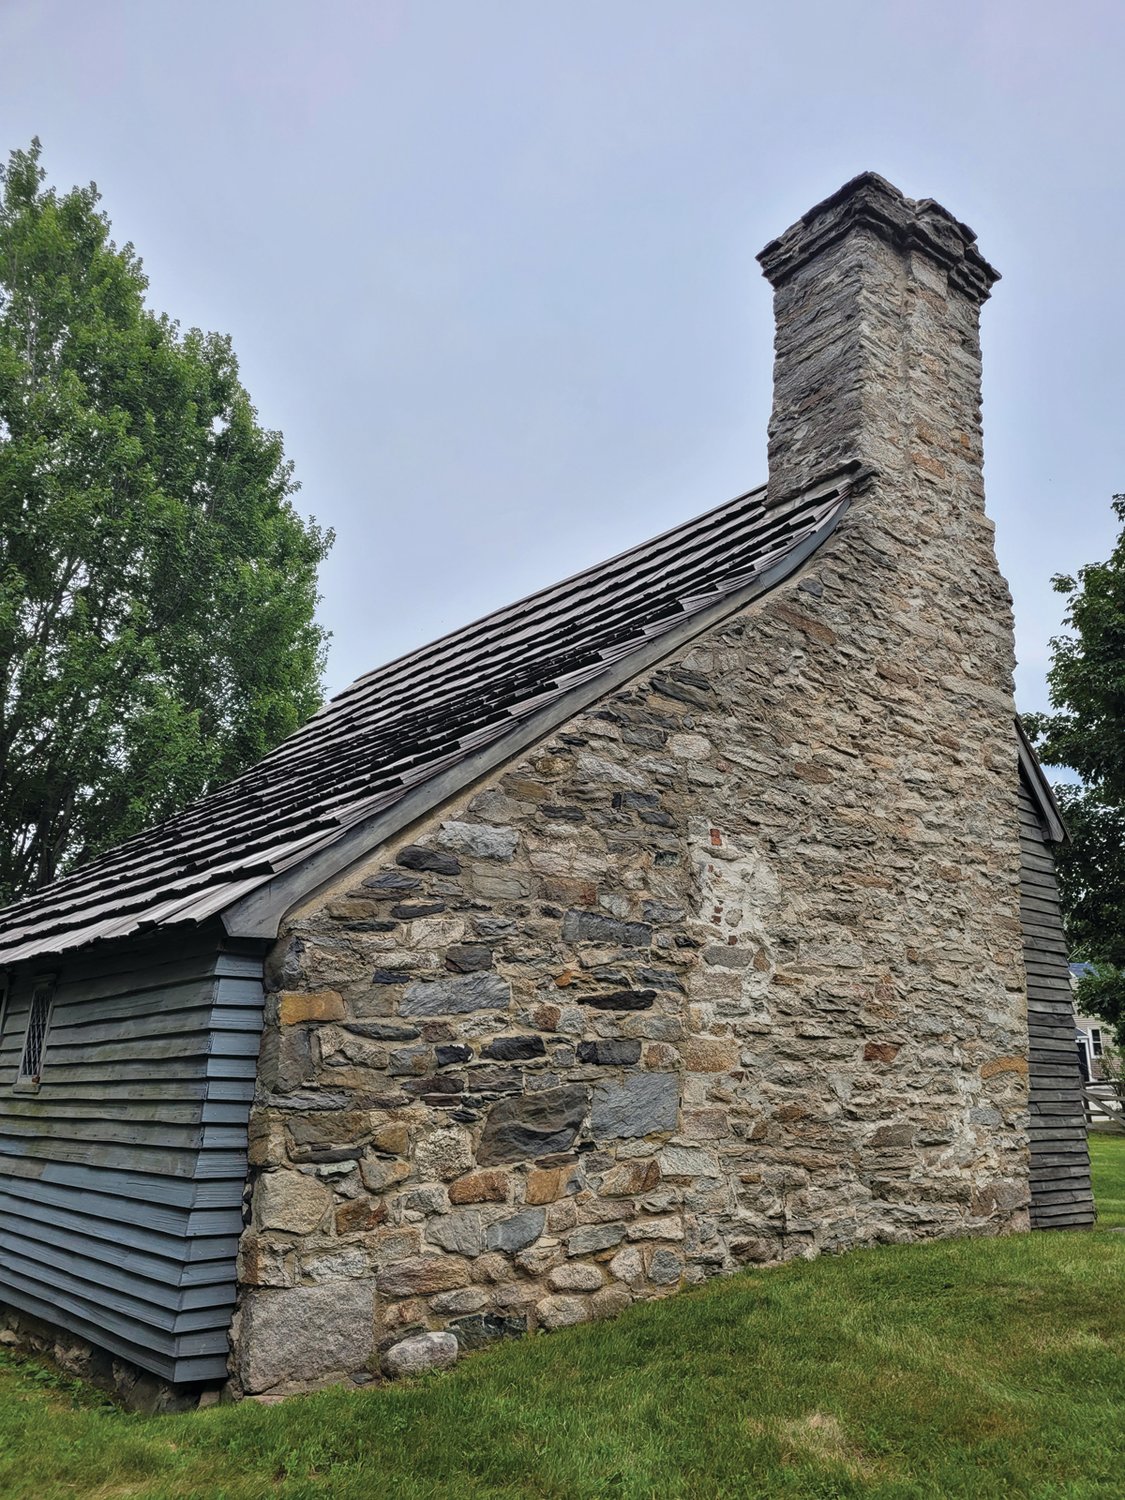 STONE-ENDER: The Clemence-Irons House is a rare surviving ‘stone-ender,’ a type of architecture used by New England’s earliest European settlers. Most houses of this type burned during King Phillip’s War.